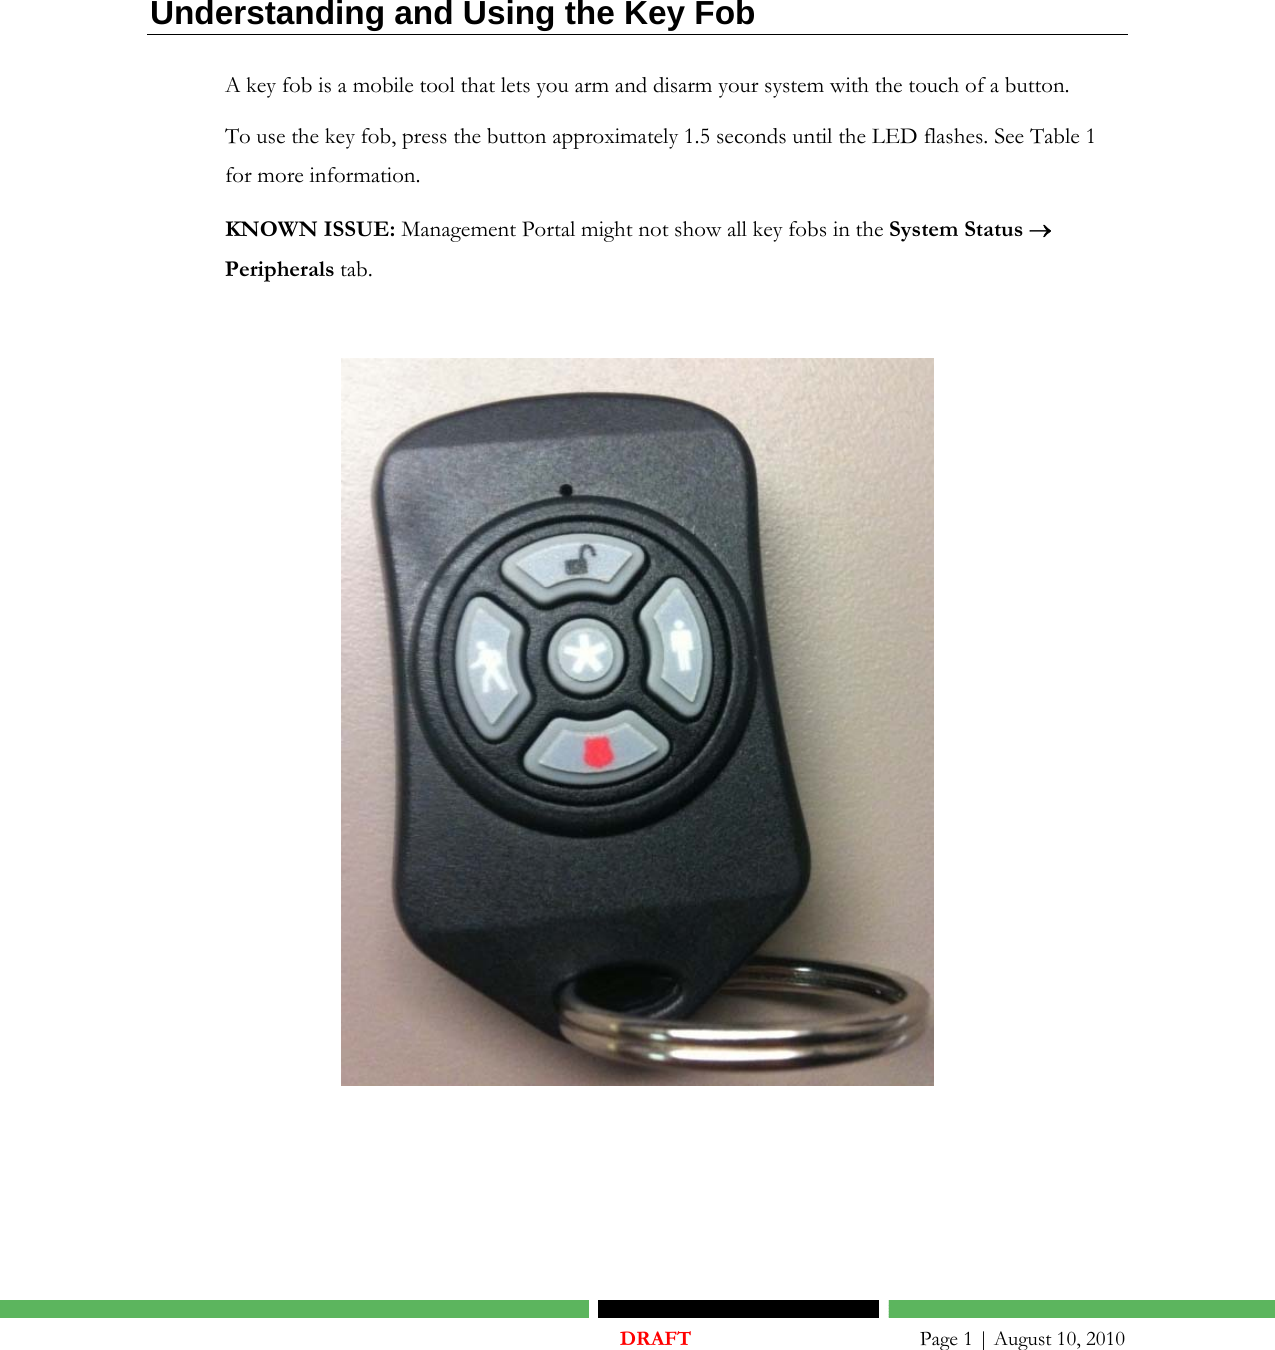    DRAFT       Page 1 | August 10, 2010  Understanding and Using the Key Fob A key fob is a mobile tool that lets you arm and disarm your system with the touch of a button. To use the key fob, press the button approximately 1.5 seconds until the LED flashes. See Table 1 for more information.    KNOWN ISSUE: Management Portal might not show all key fobs in the System Status → Peripherals tab.     